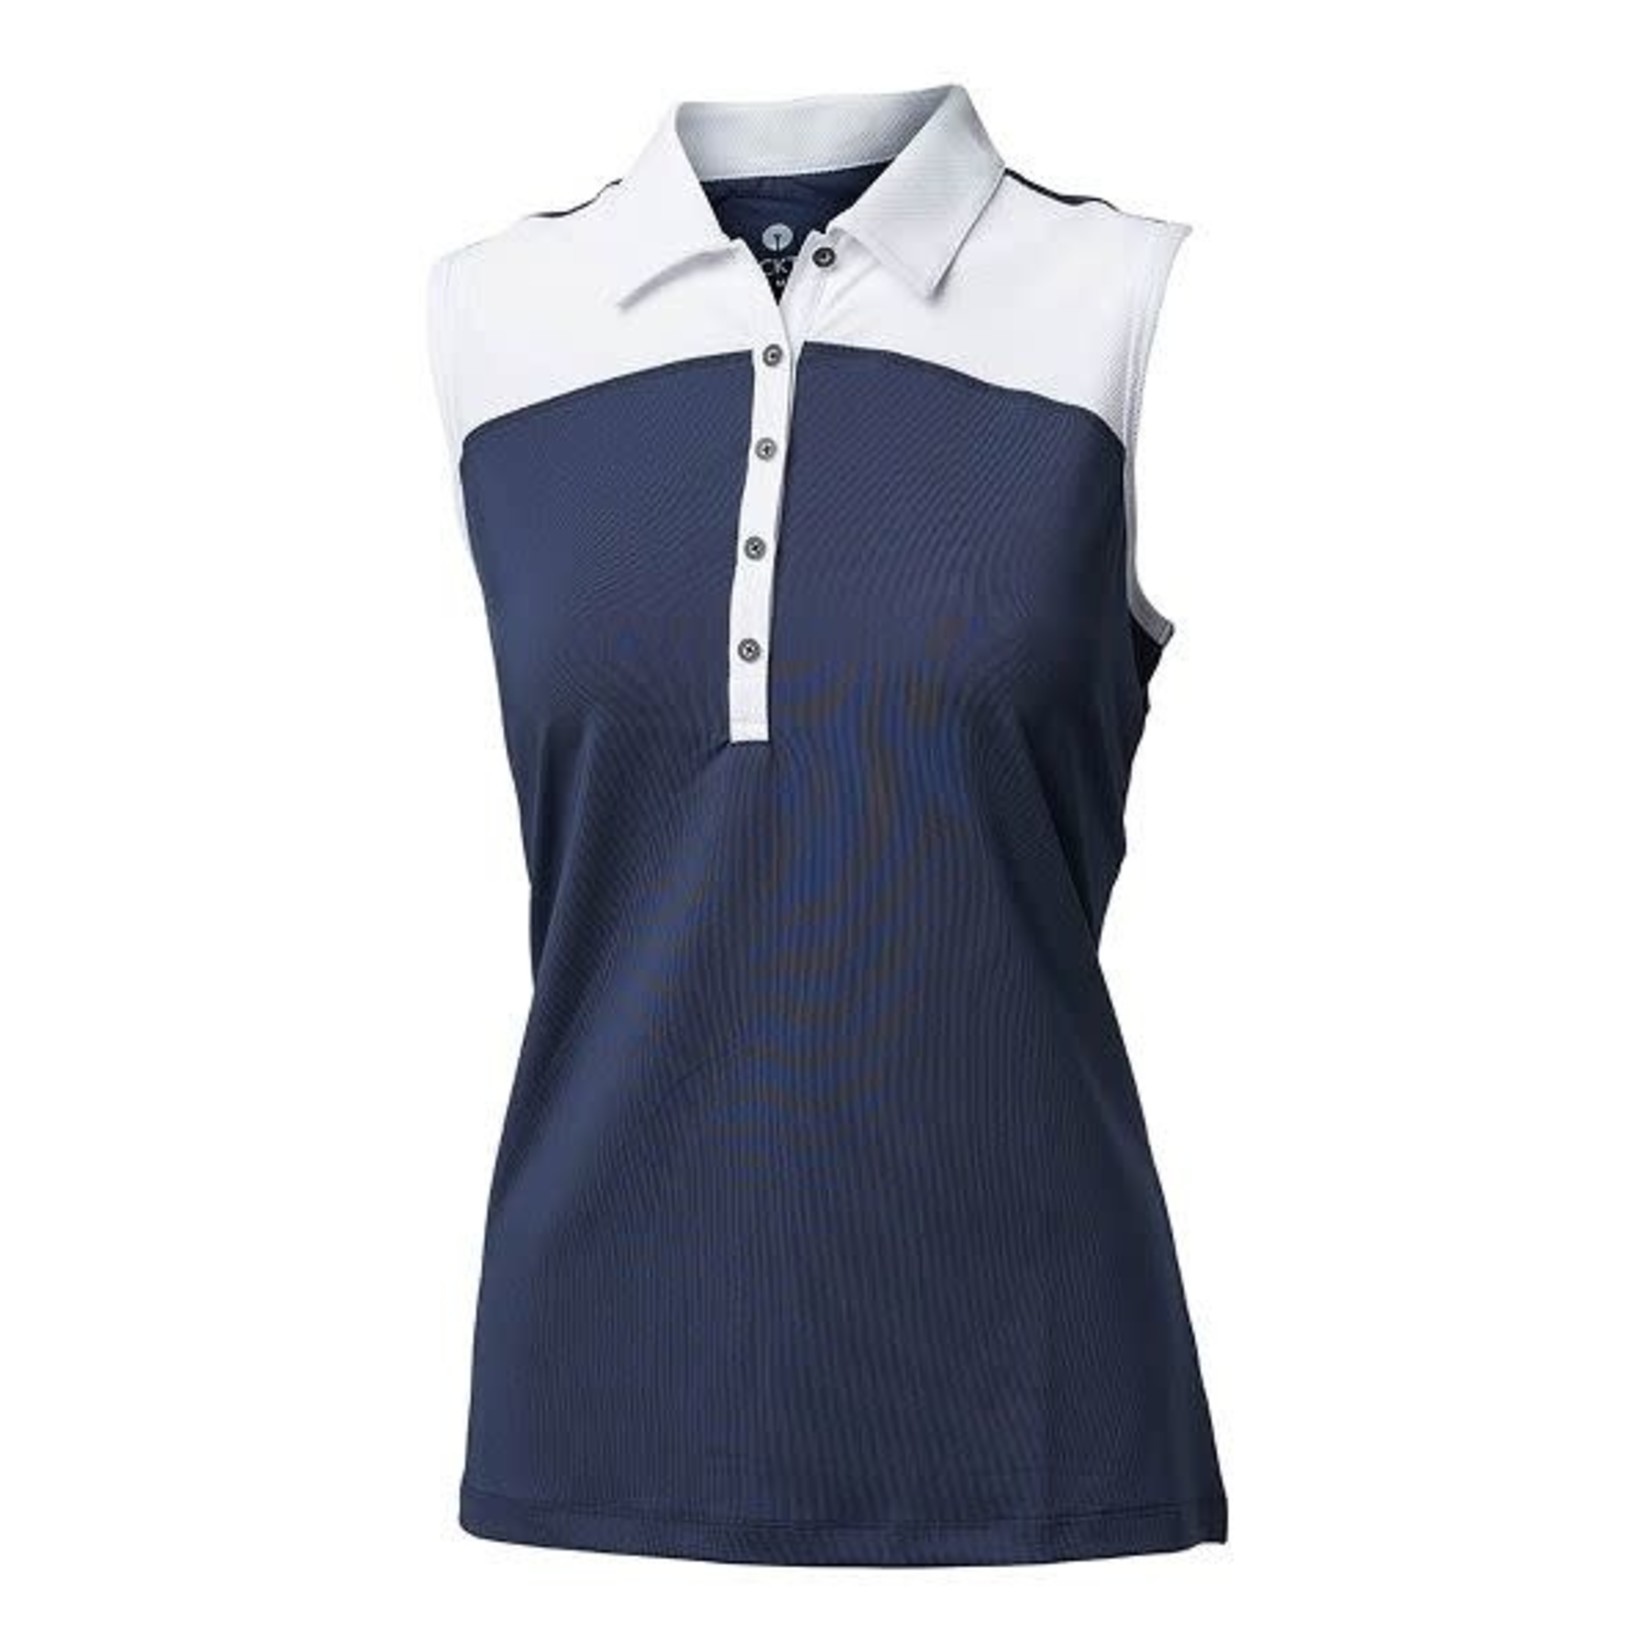 Backtee Backtee Ladies Colour Sleeveless navy/white 3014, navy M